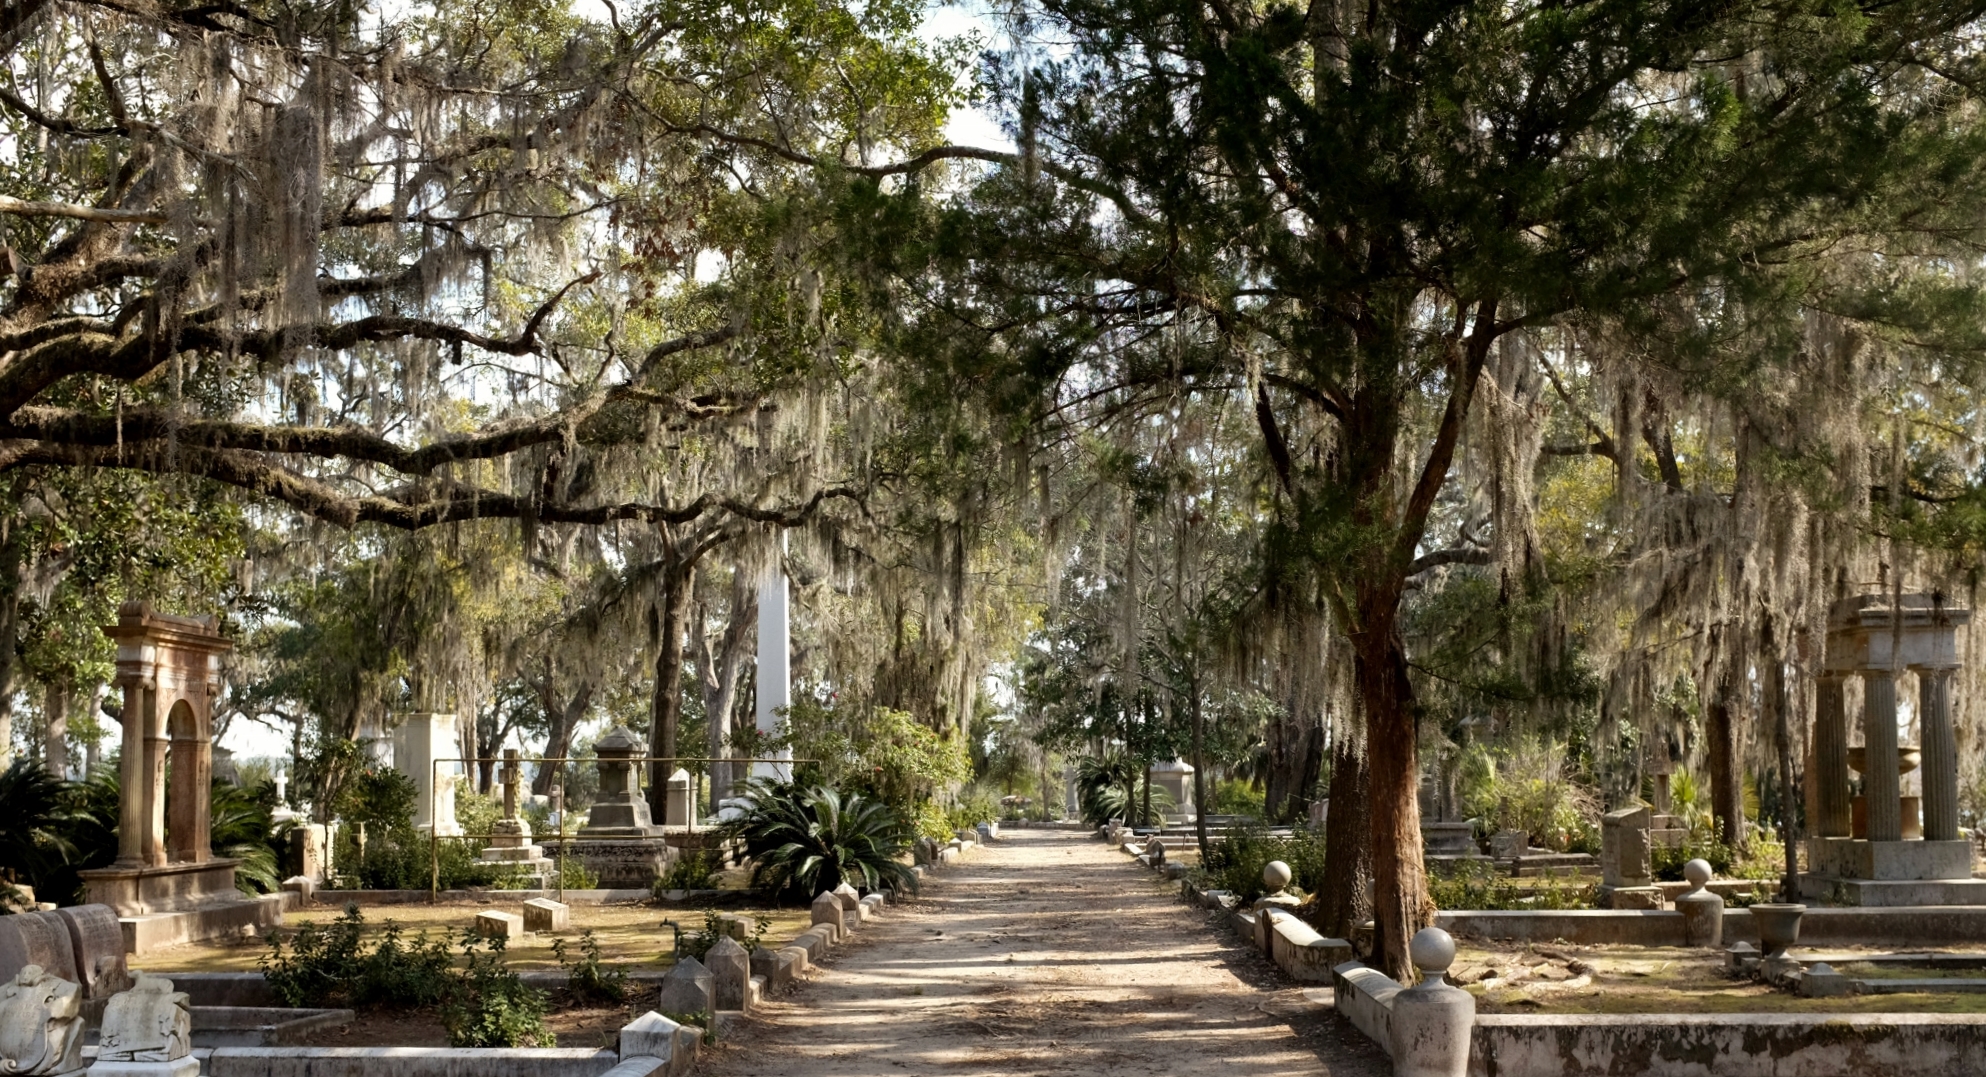 Top 10 things to do in Savannah, Georgia [with Suggested Tours]